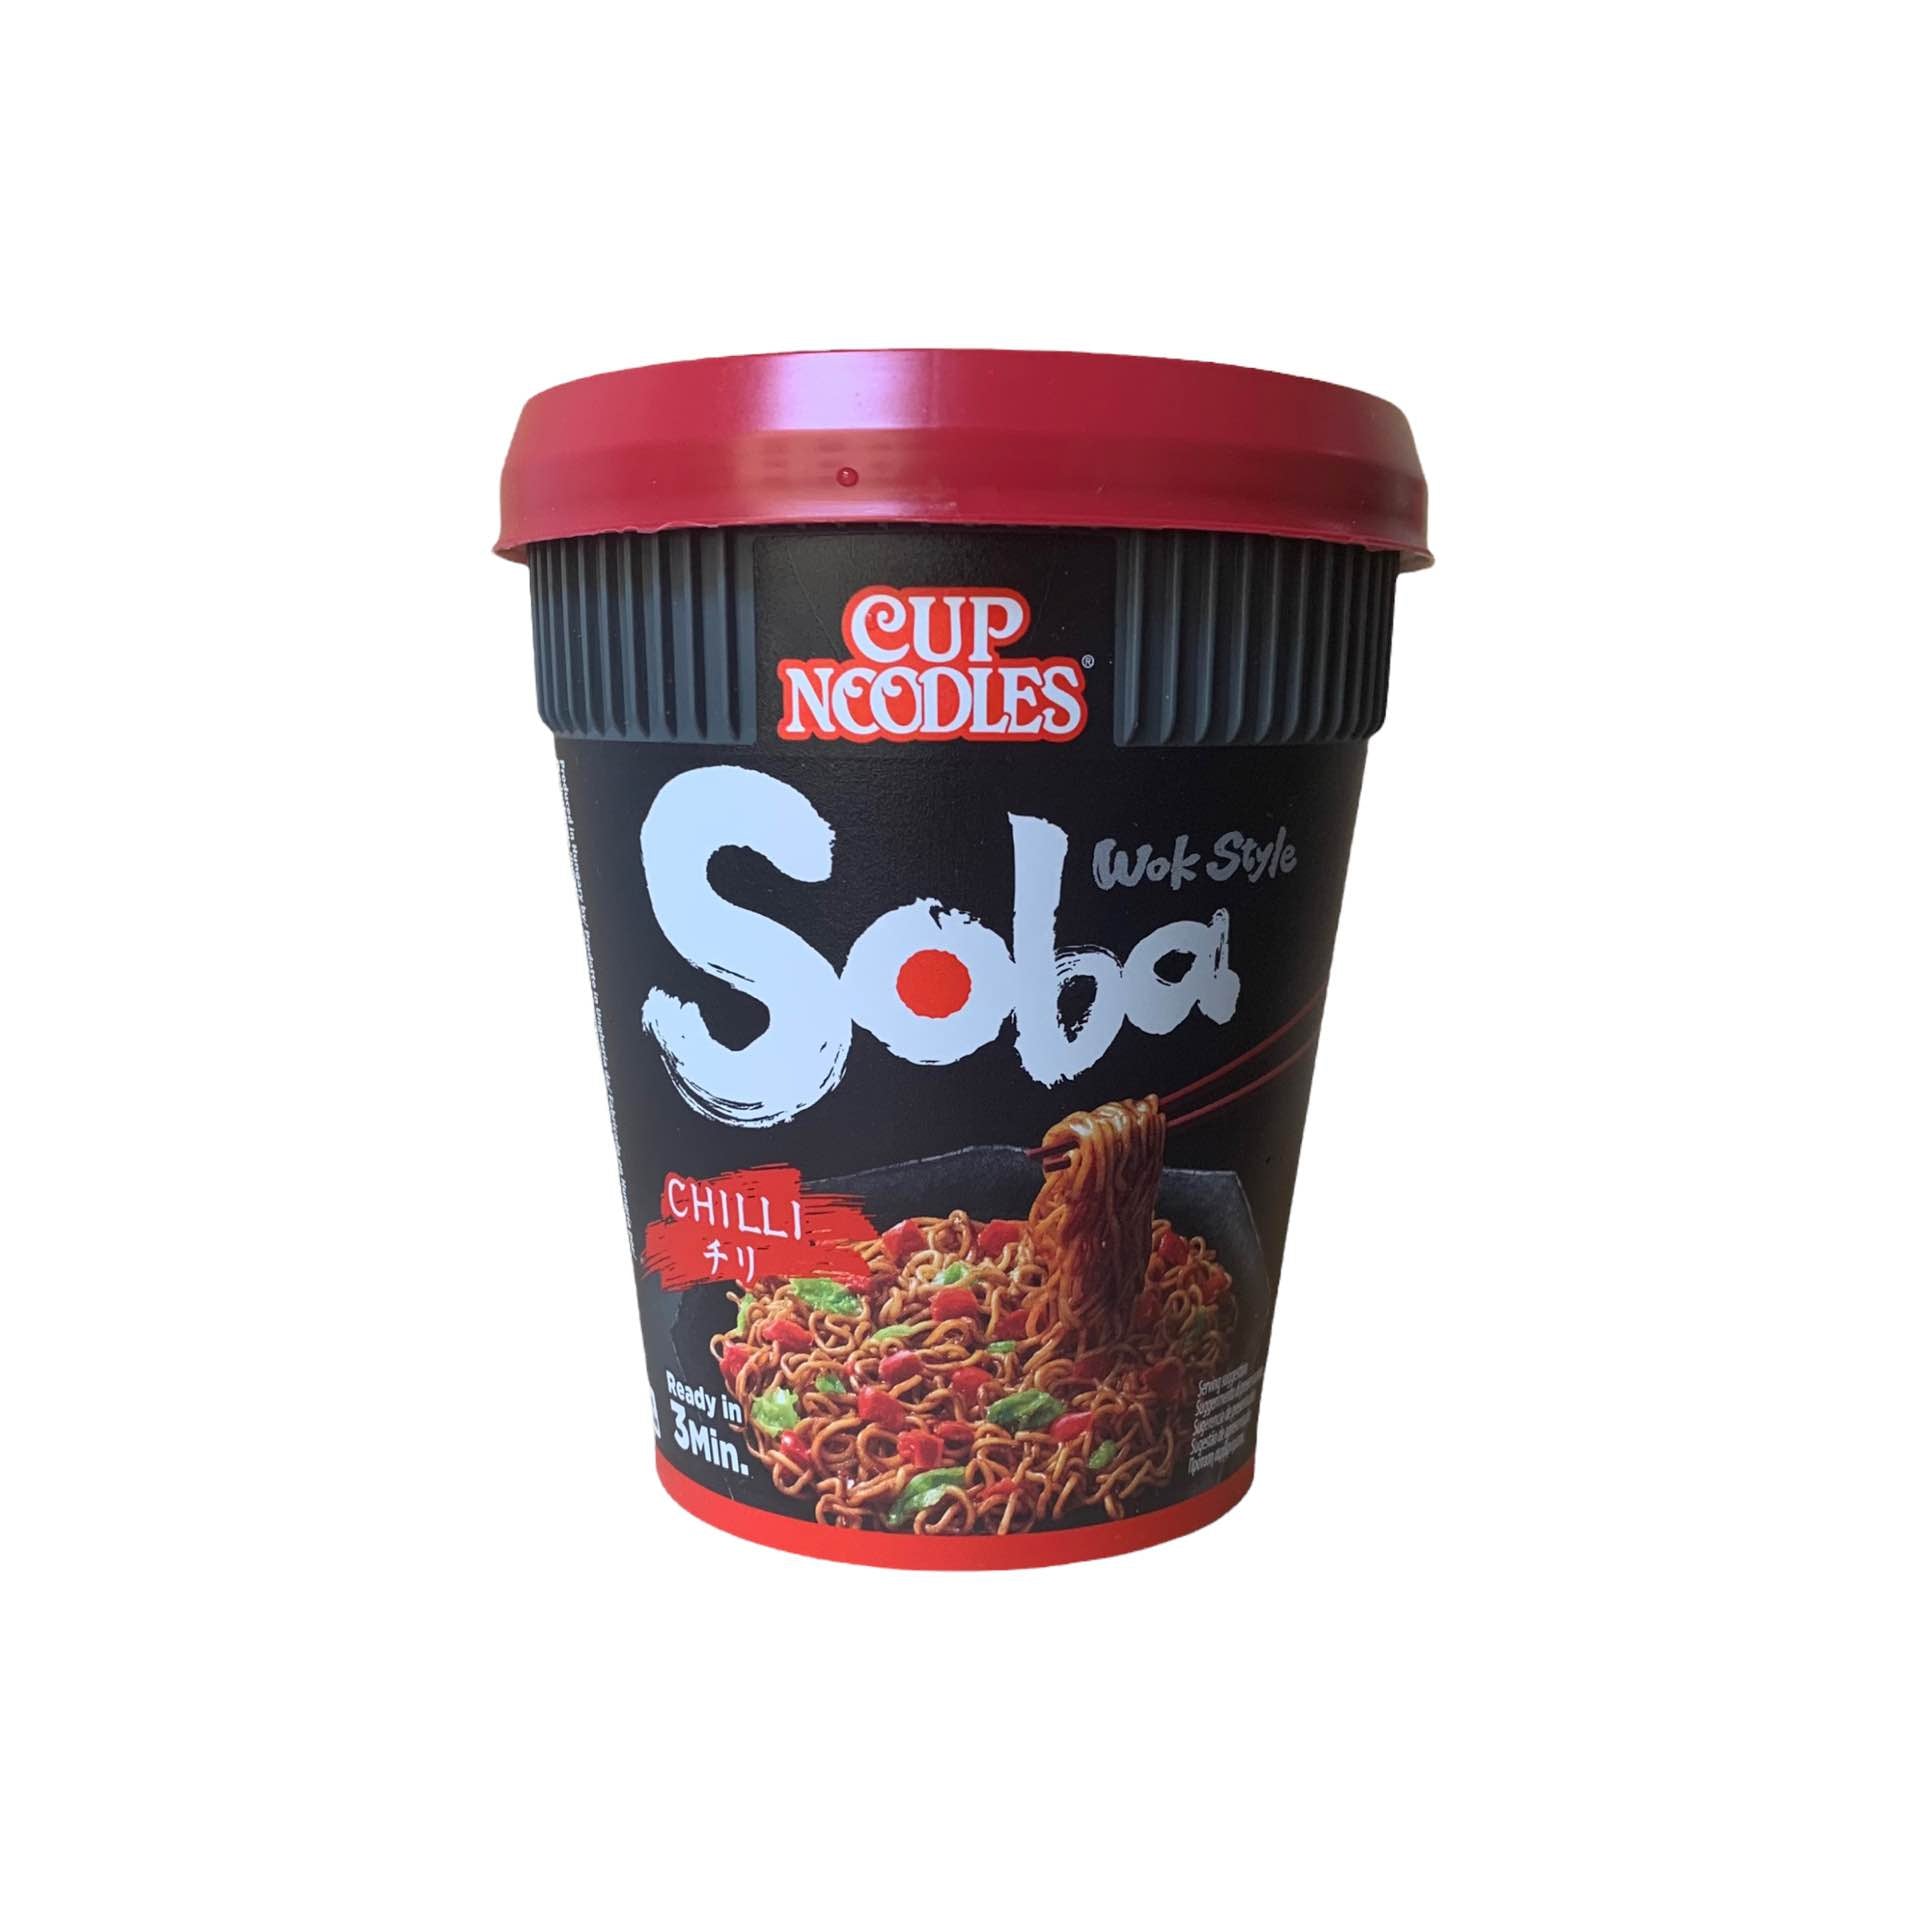 Cup Noodle Soba Chili Wok Style 92g - Nissin